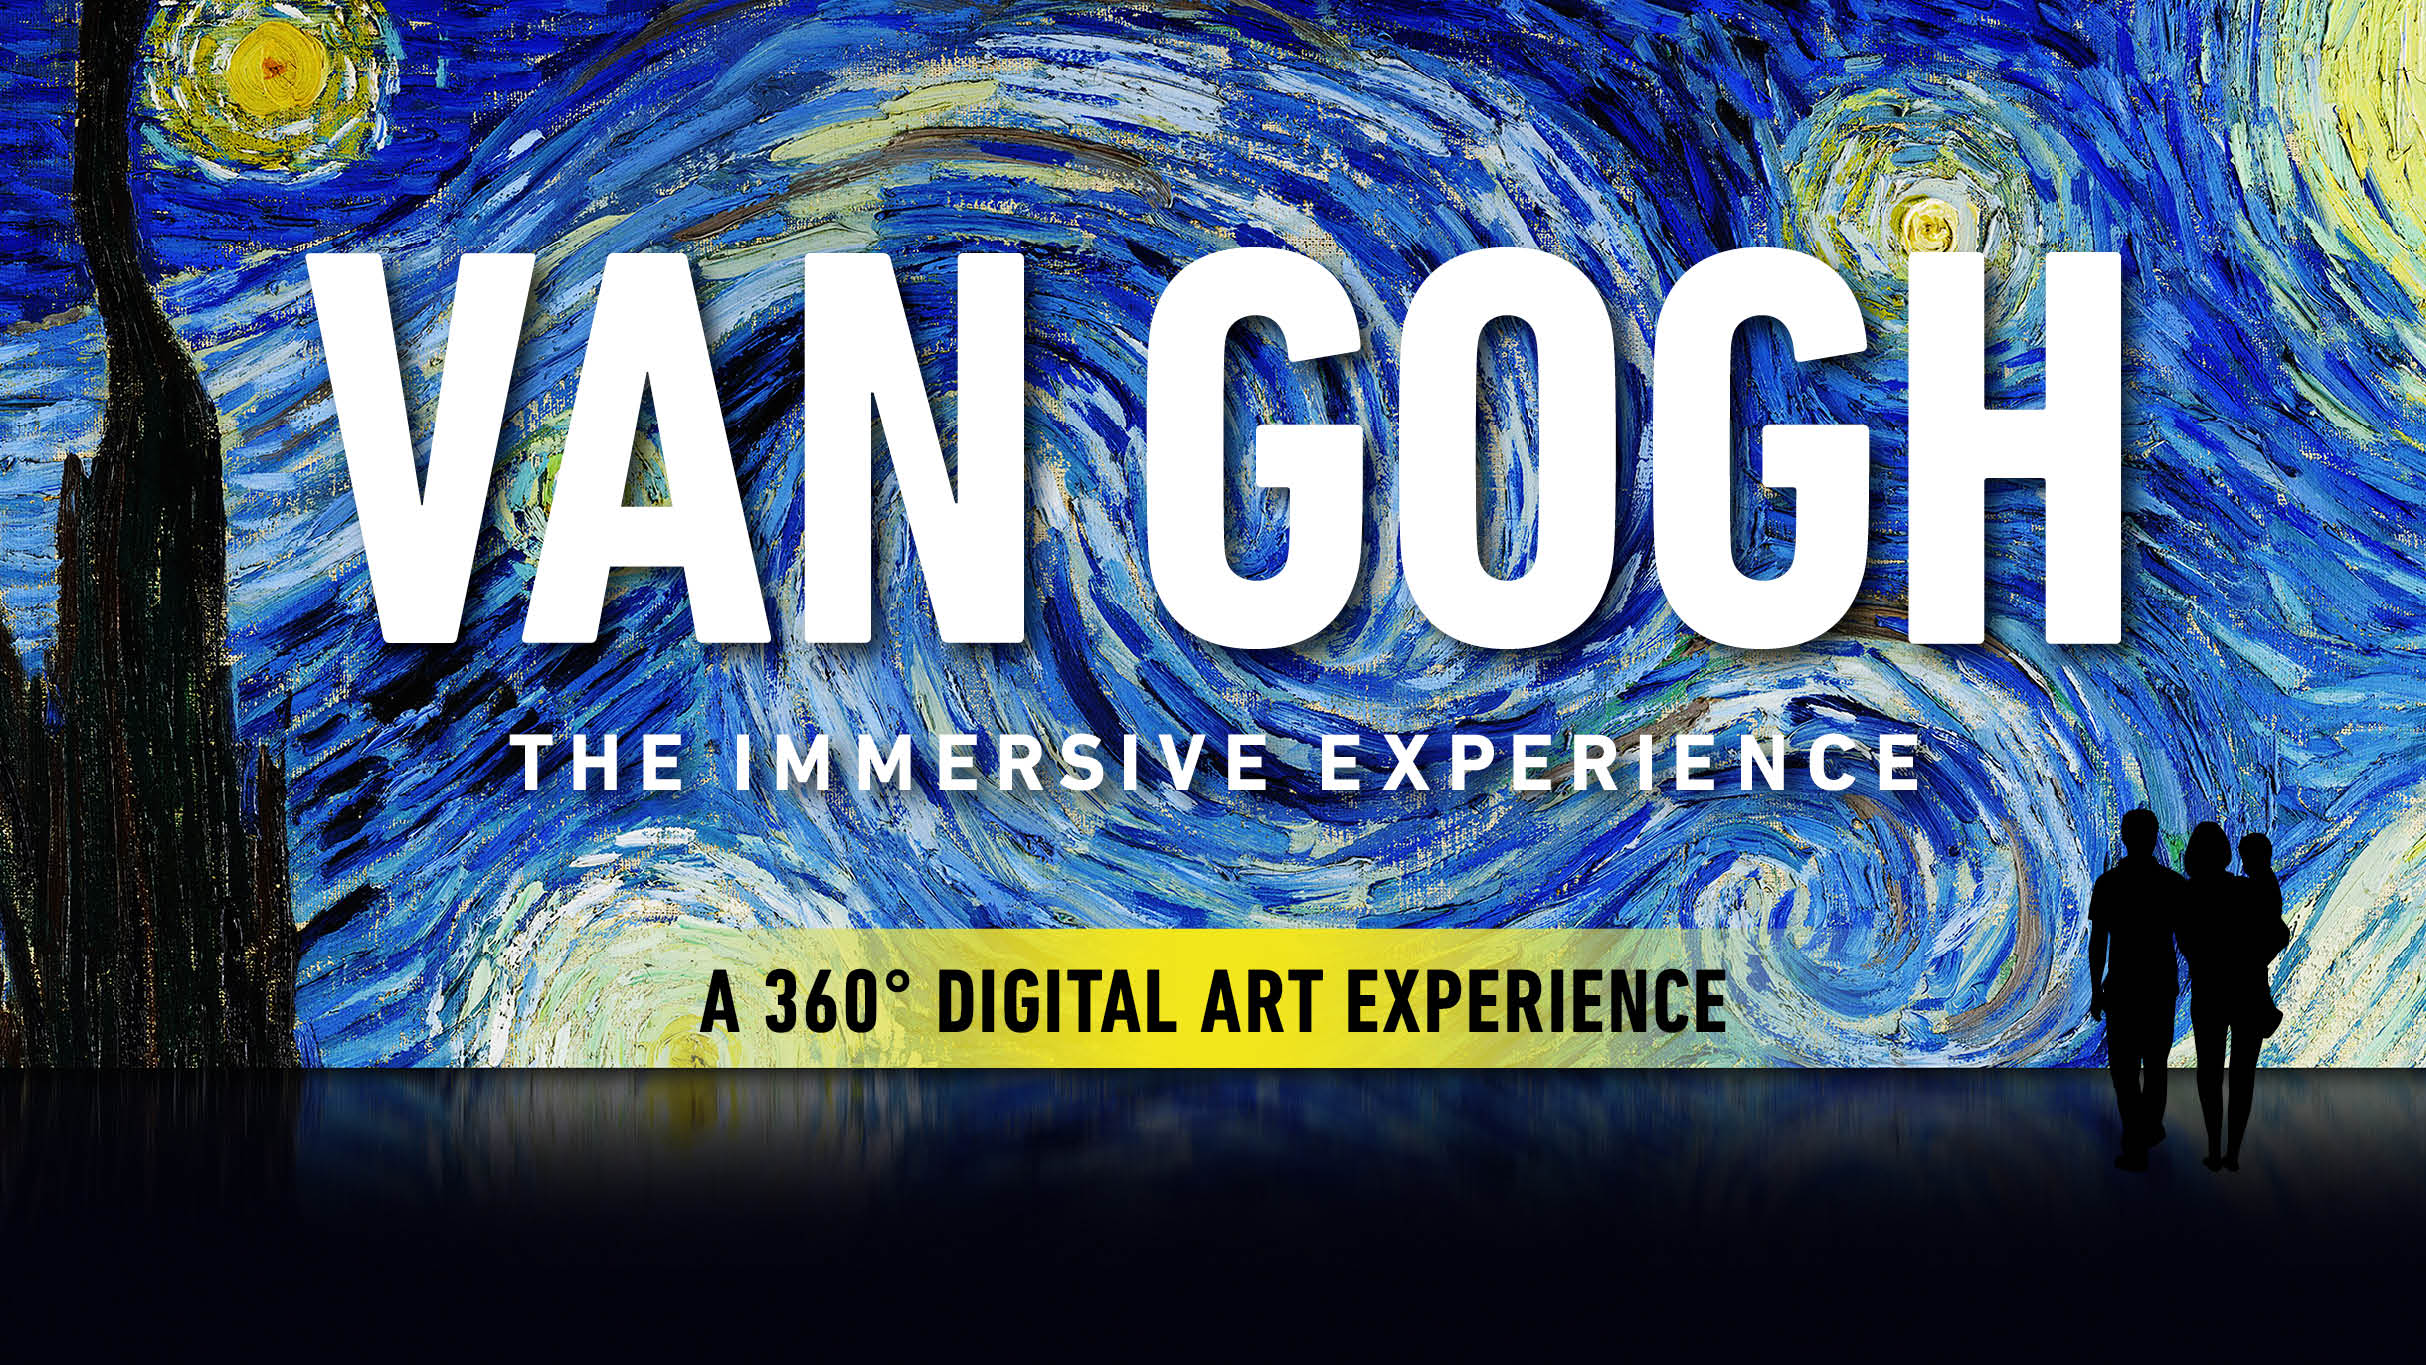 Image name Van Gogh The Immersive Experience at York St Marys York the 1 image from the post Van Gogh: The Immersive Experience at York St. Mary's, York in Yorkshire.com.